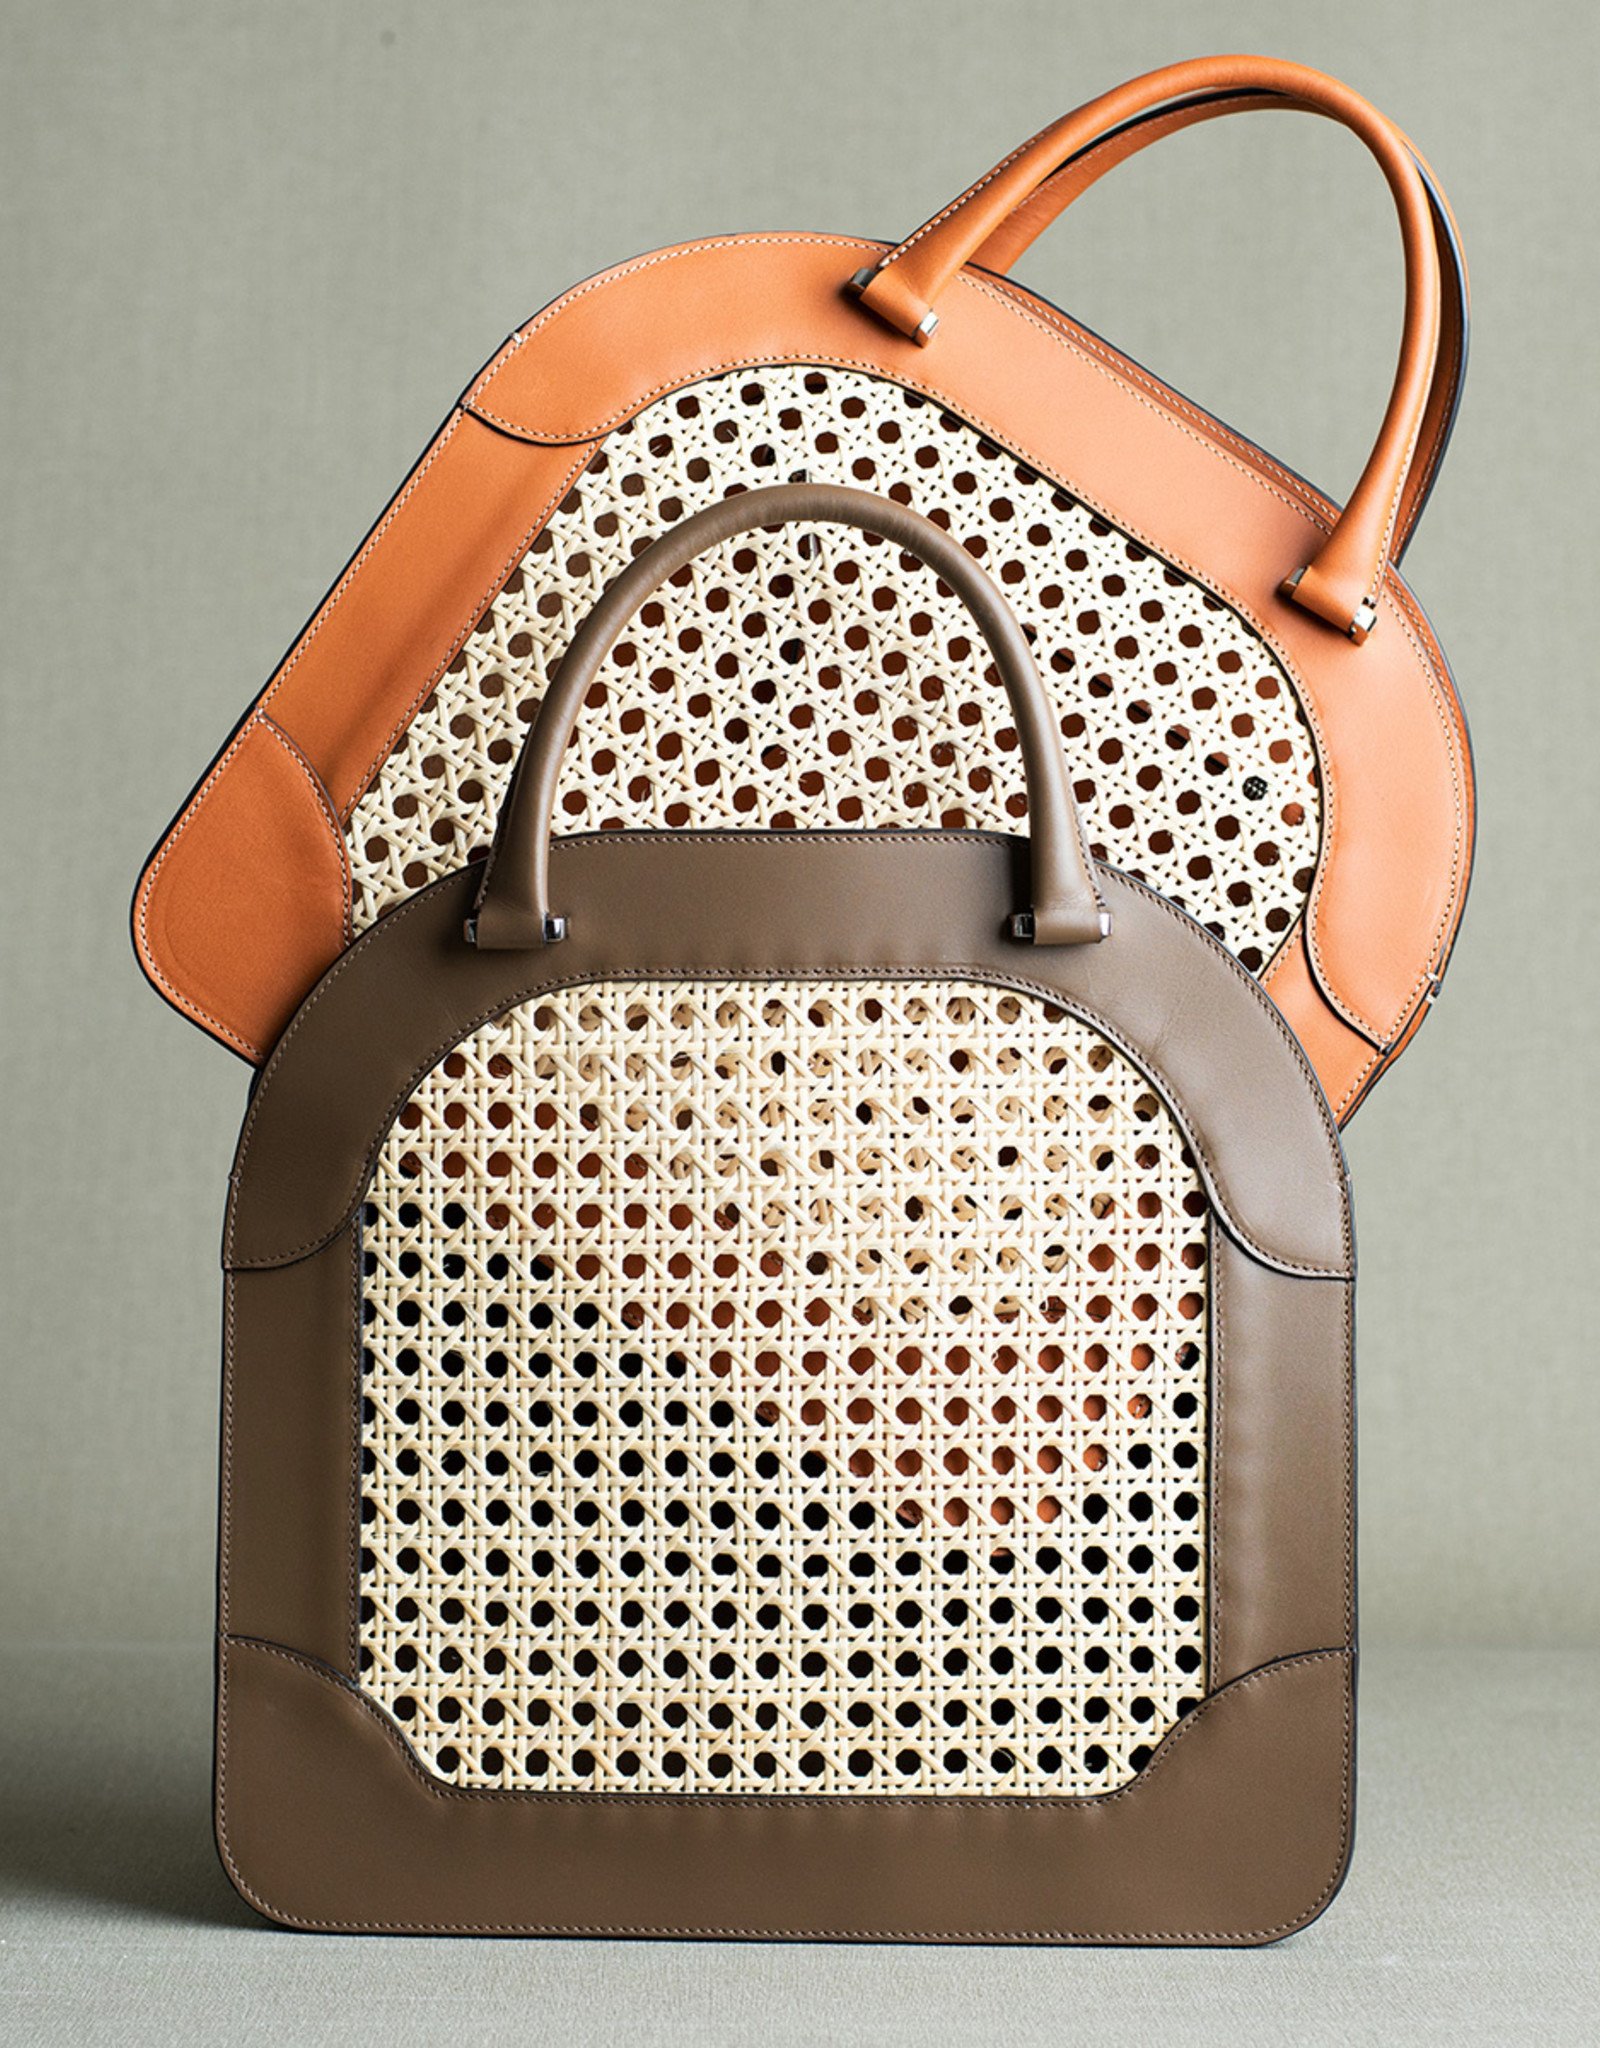 Rattan Bag 125 by Palmgrens | Rock leather